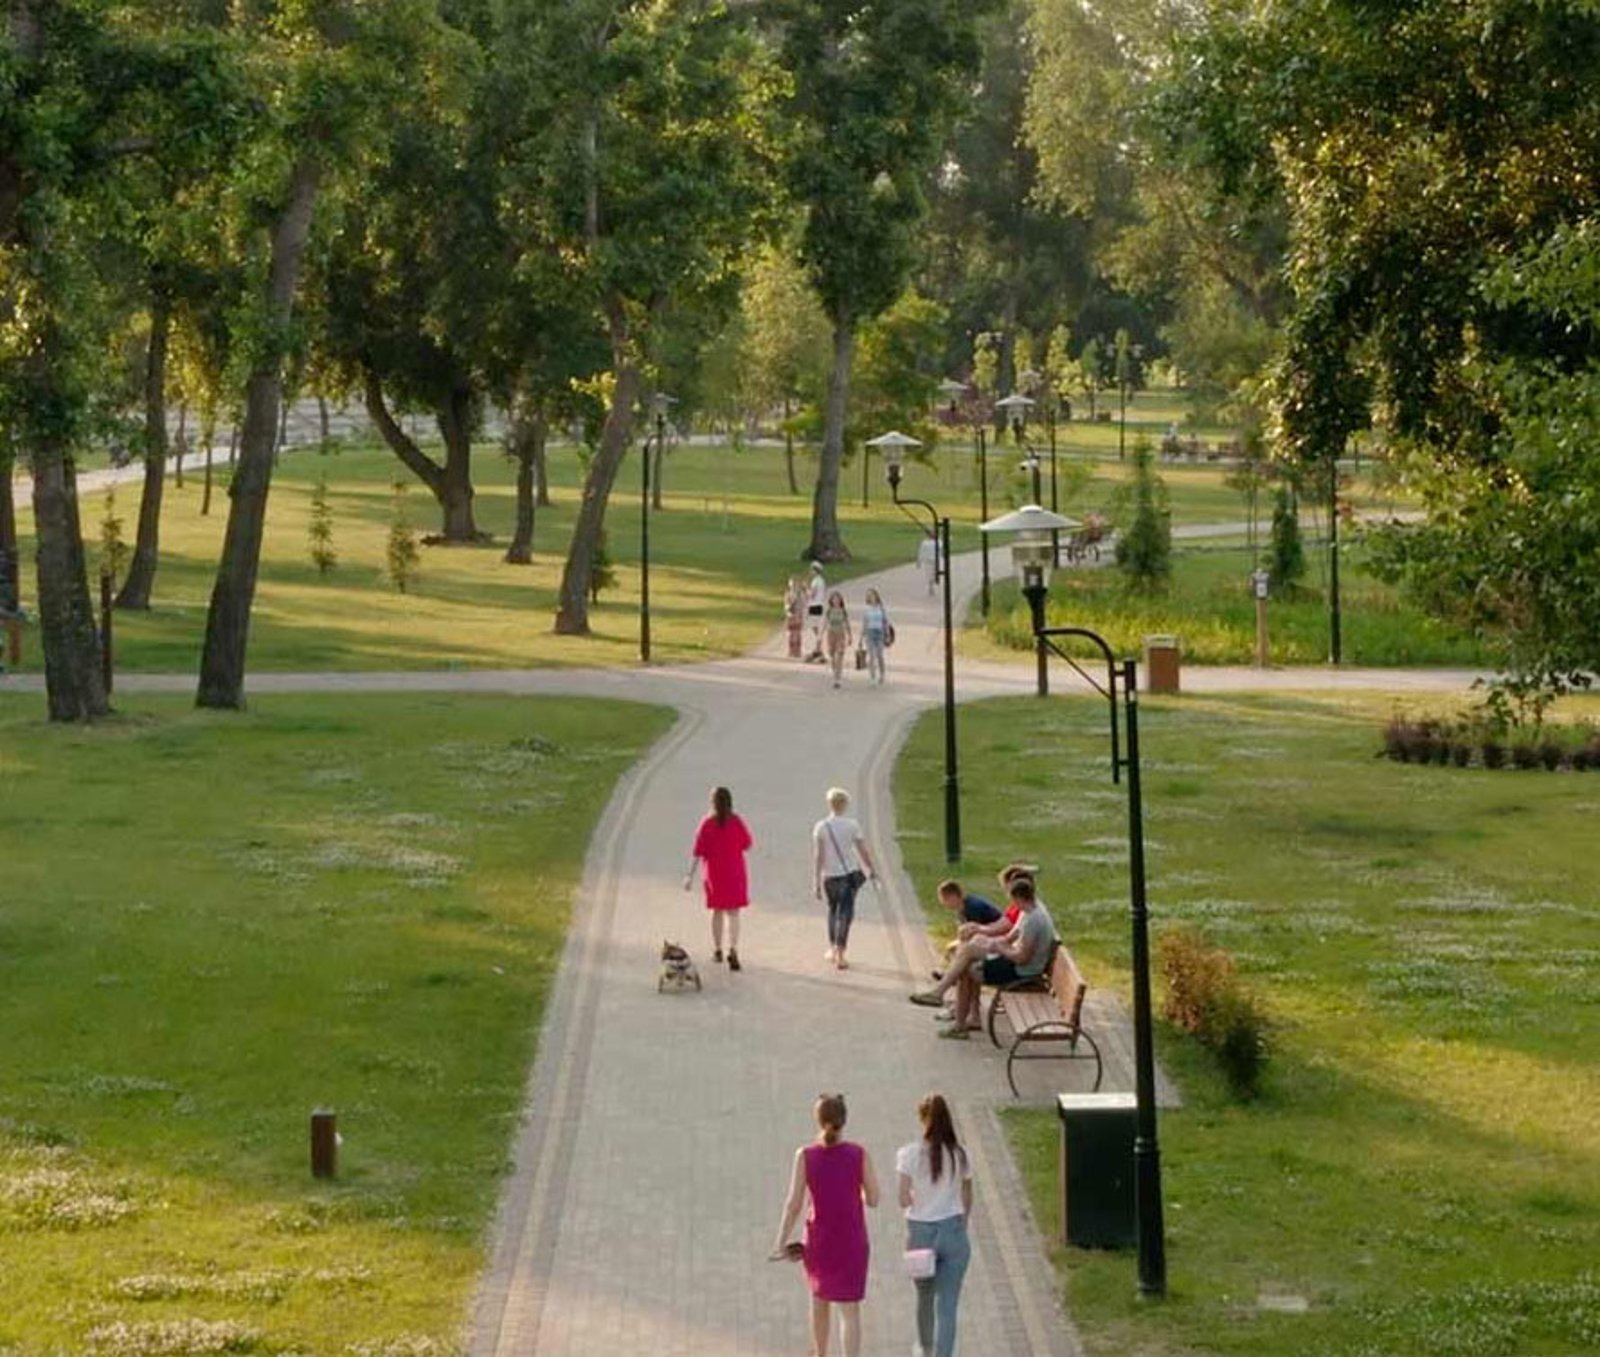 People walking around a park in a city